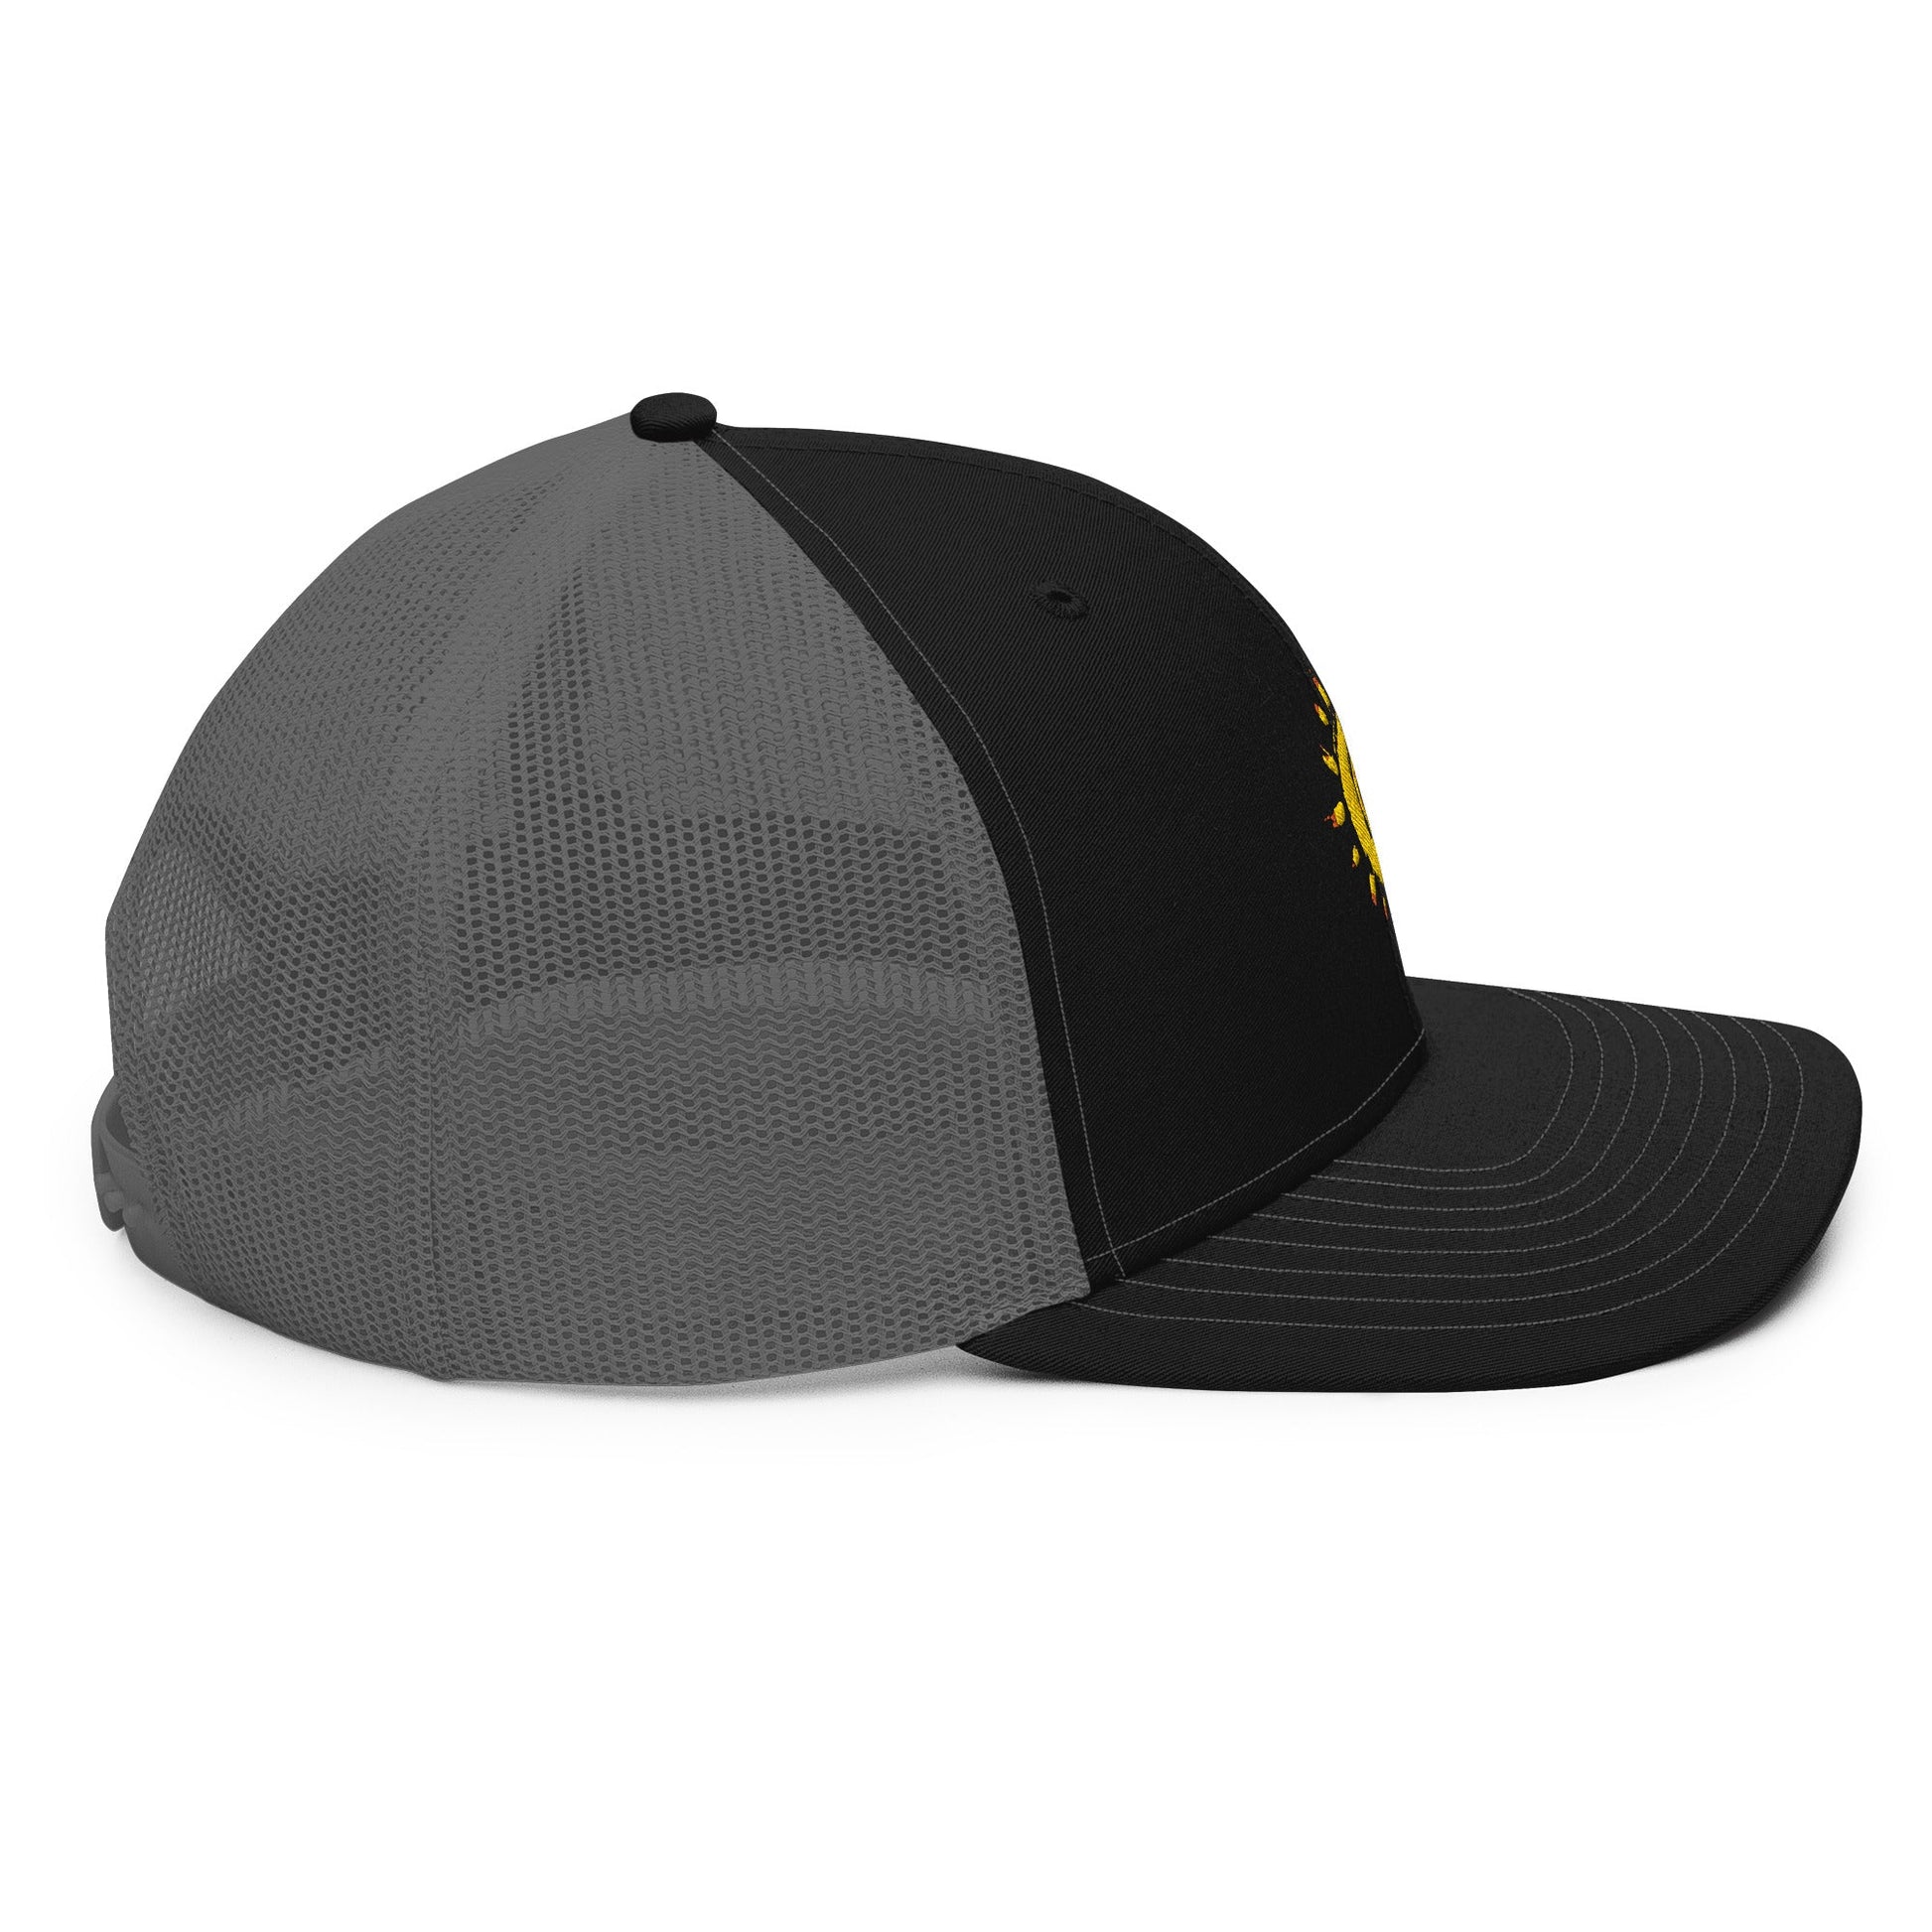 SUNZOUT BRAND EMBROIDERED HAT - Sunzout Outdoor Spaces LLC